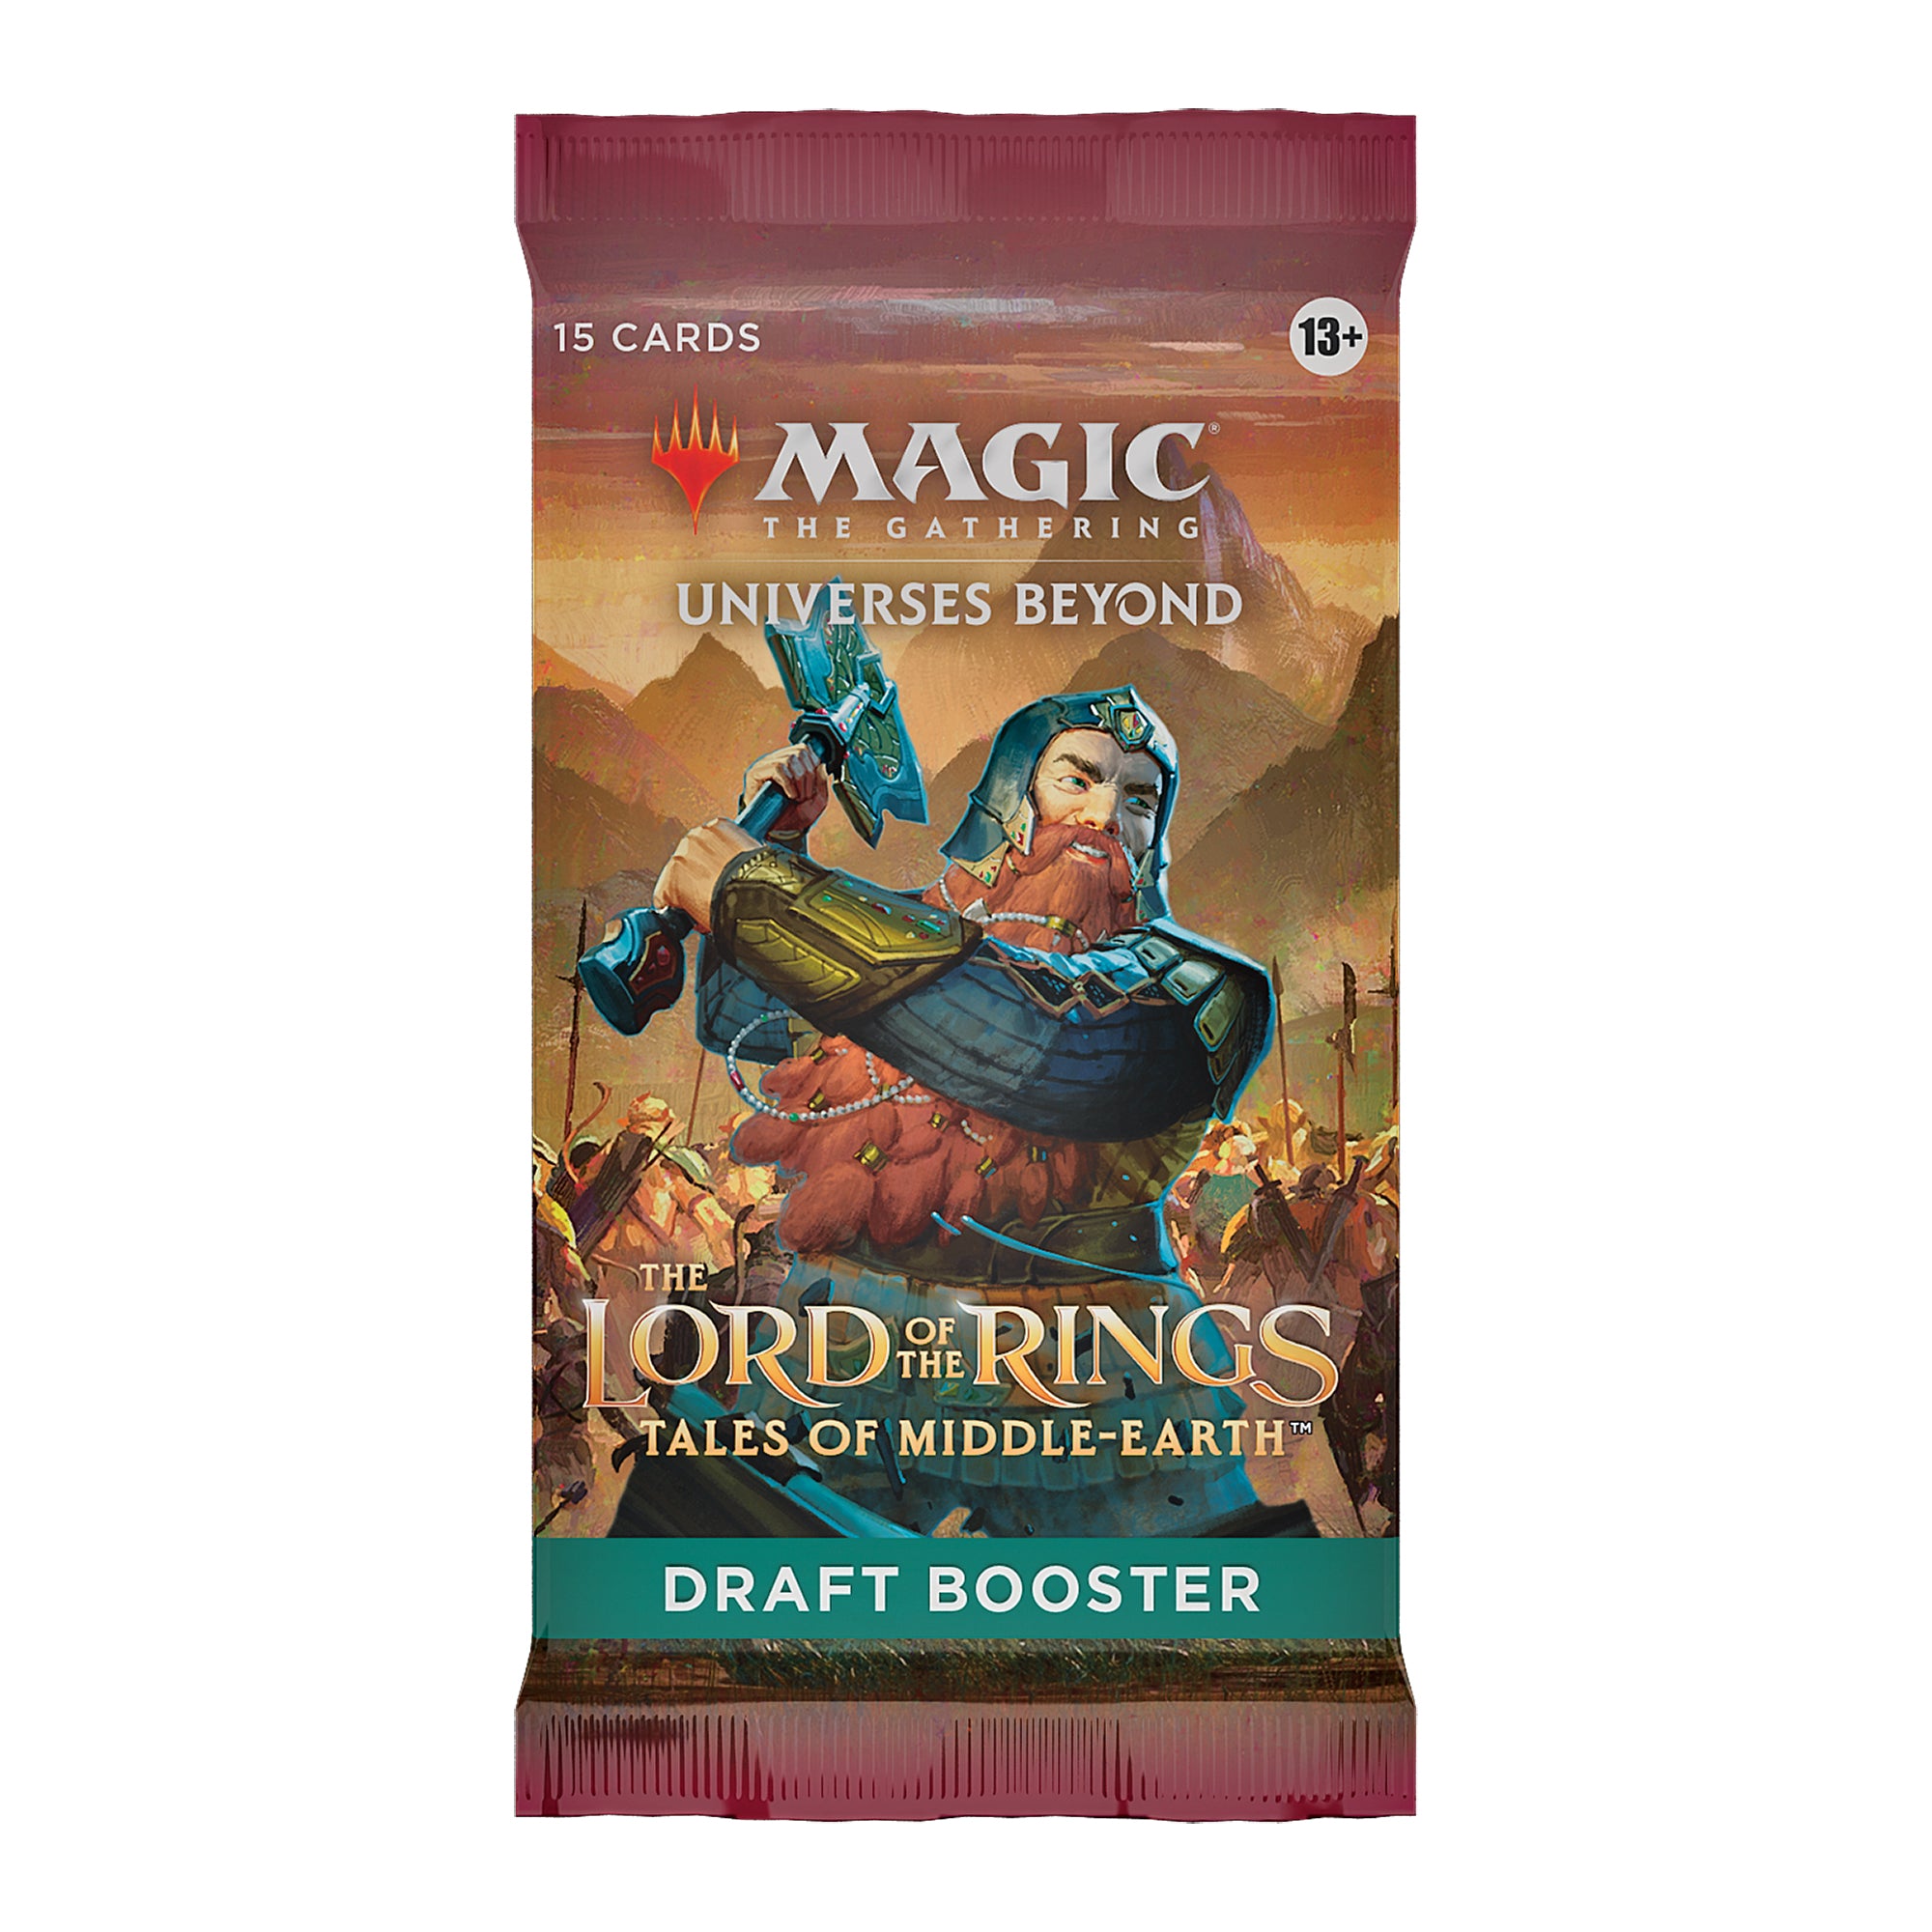 The Lord of the Rings: Tales of Middle-Earth Draft Booster - englisch